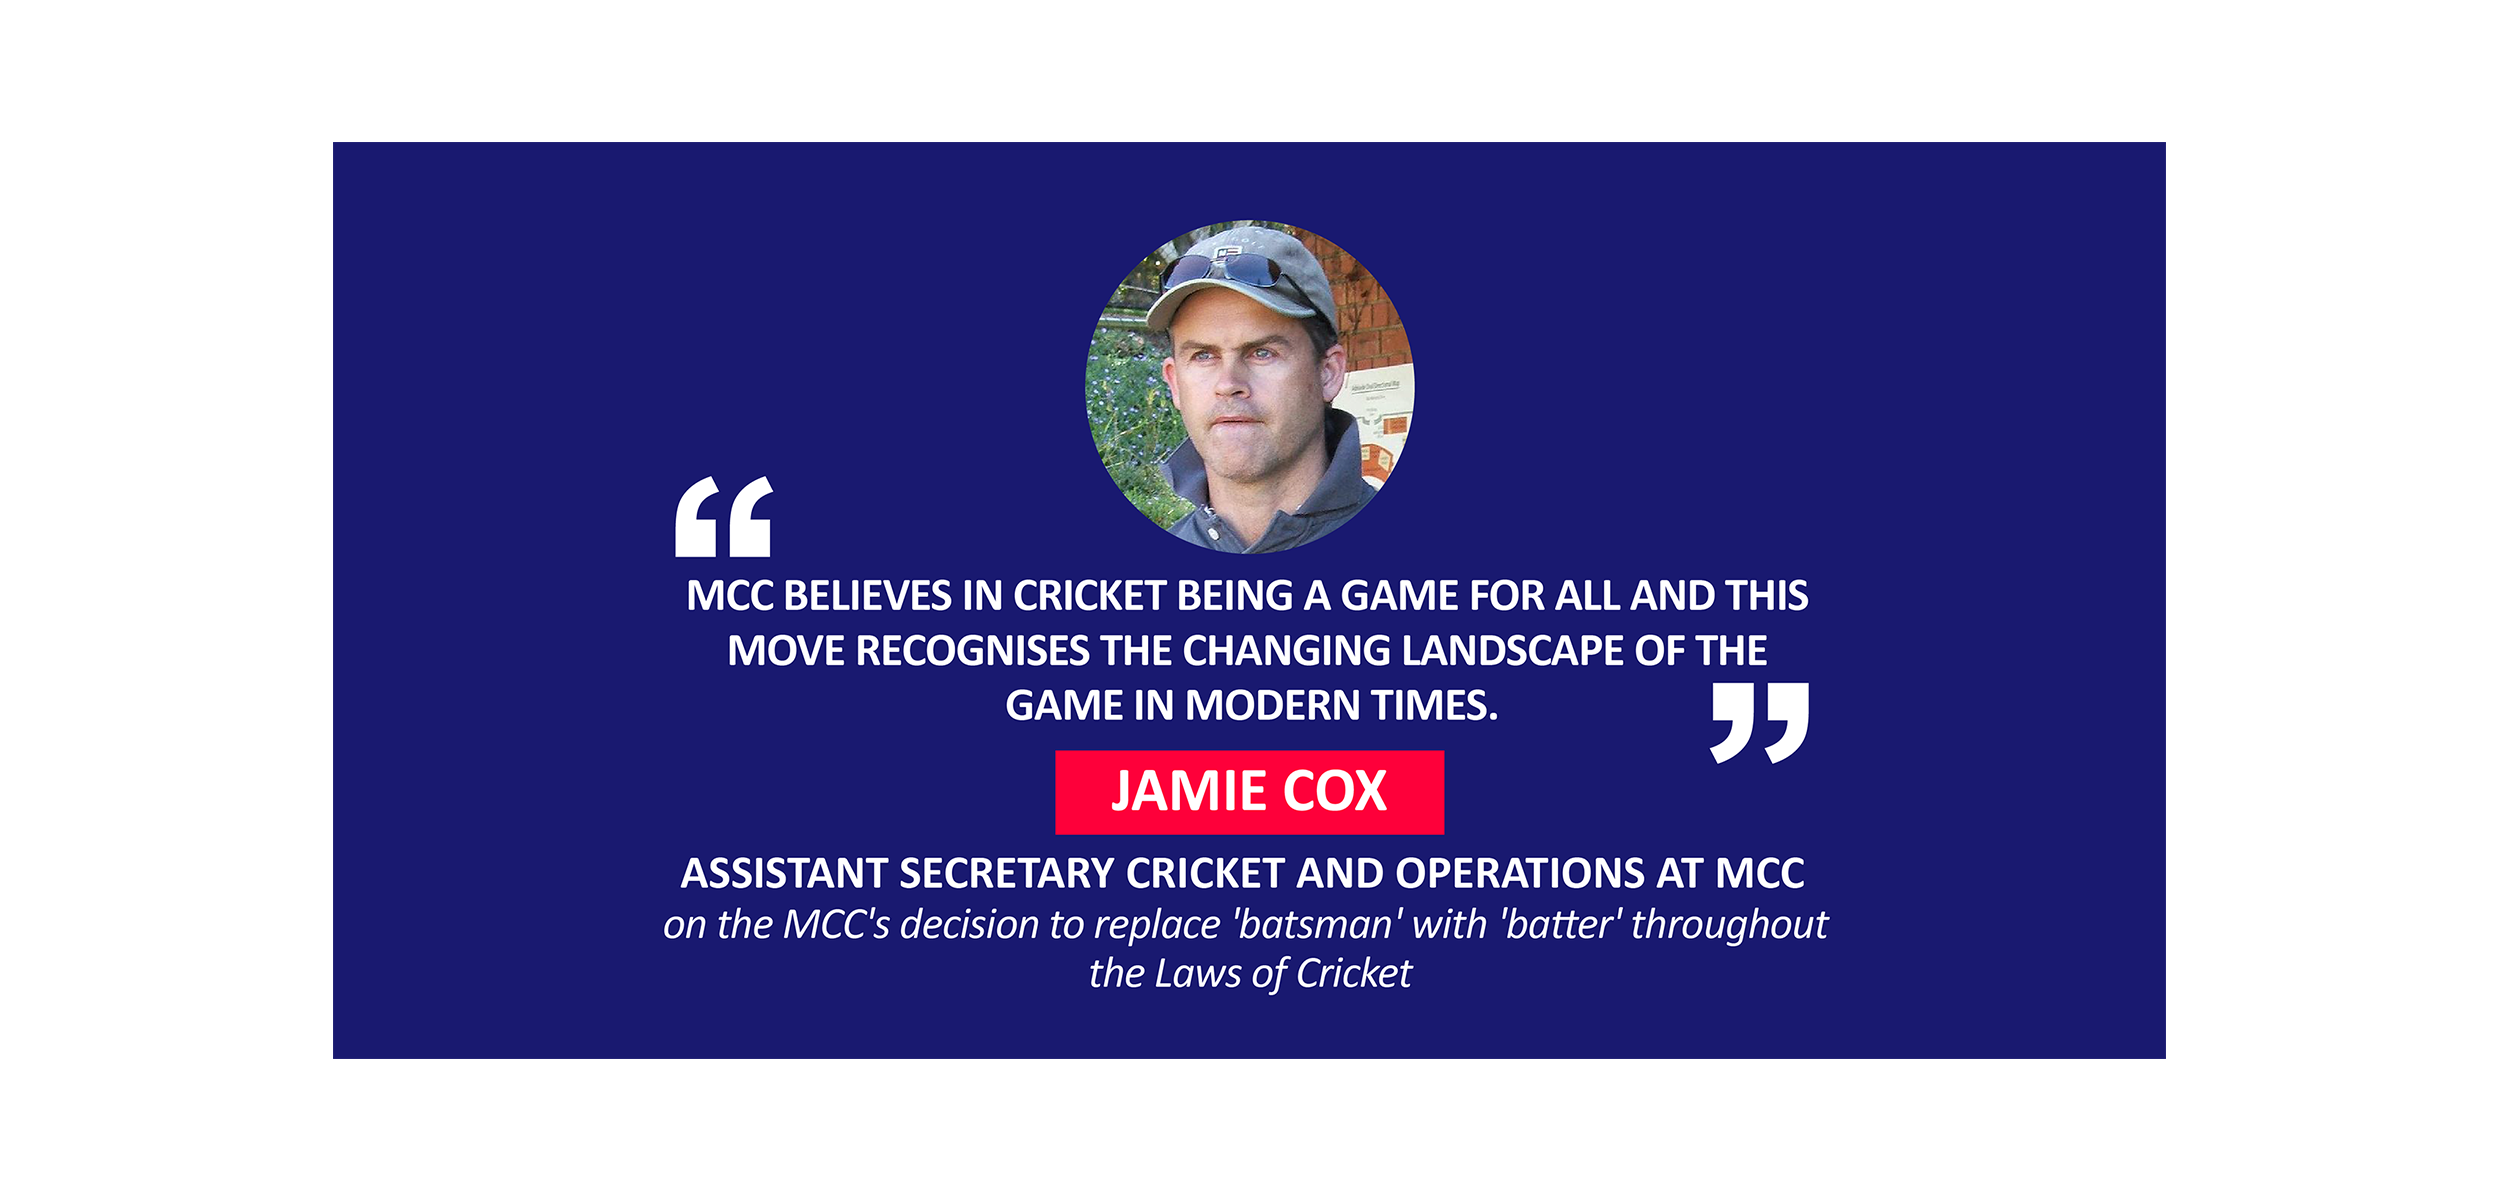 Jamie Cox, Assistant Secretary Cricket and Operations at MCC on the MCC's decision to replace 'batsman' with 'batter' throughout the Laws of Cricket